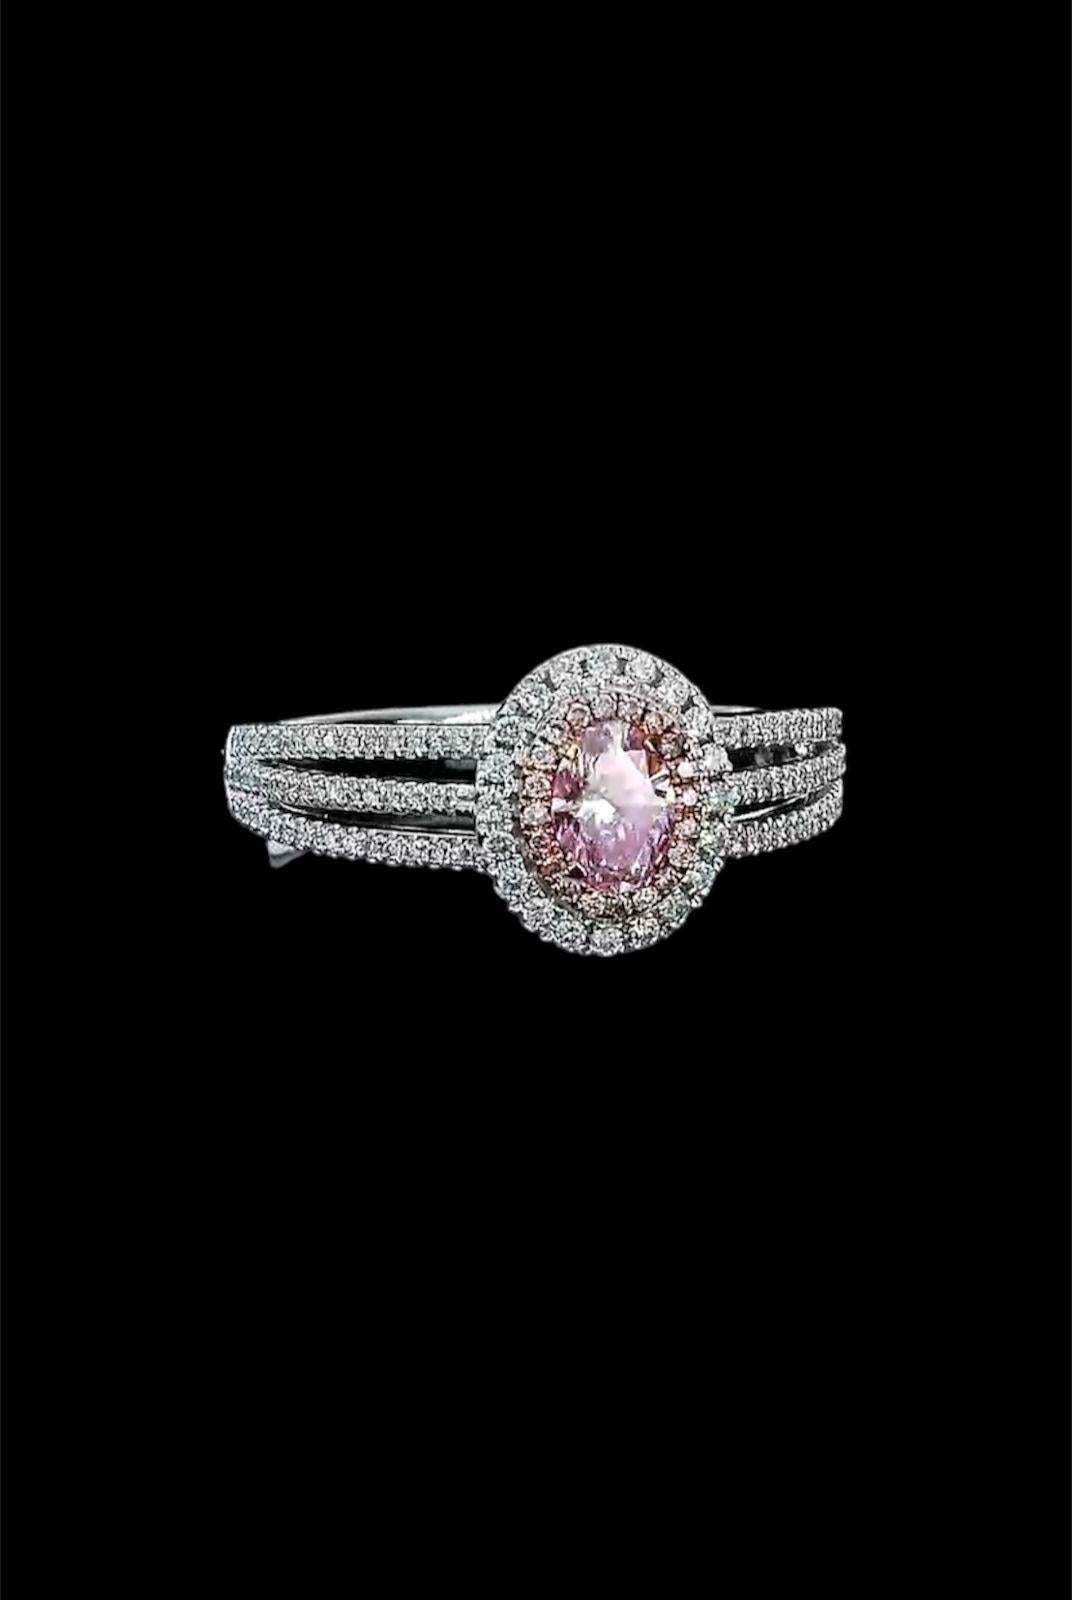 **100% NATURAL FANCY COLOUR DIAMOND JEWELRY**

✪ Jewelry Details ✪

♦ MAIN STONE DETAILS

➛ Stone Shape: Oval
➛ Stone Color: Faint pink
➛ Stone Clarity: VS2
➛ Stone Weight: 0.33 carats
➛ GIA certified

♦ SIDE STONE DETAILS

➛ Side white diamonds -